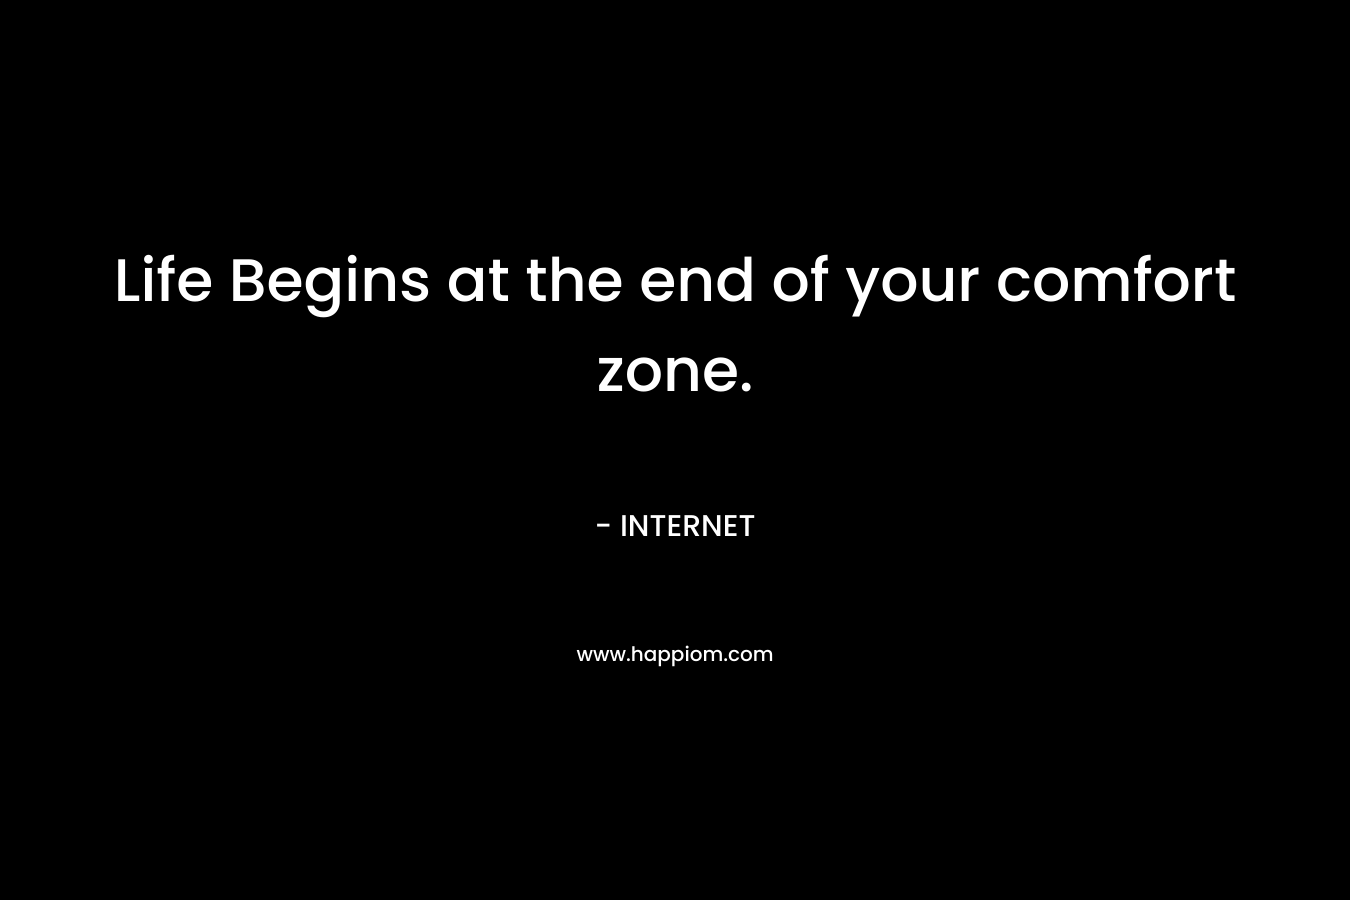 Life Begins at the end of your comfort zone.